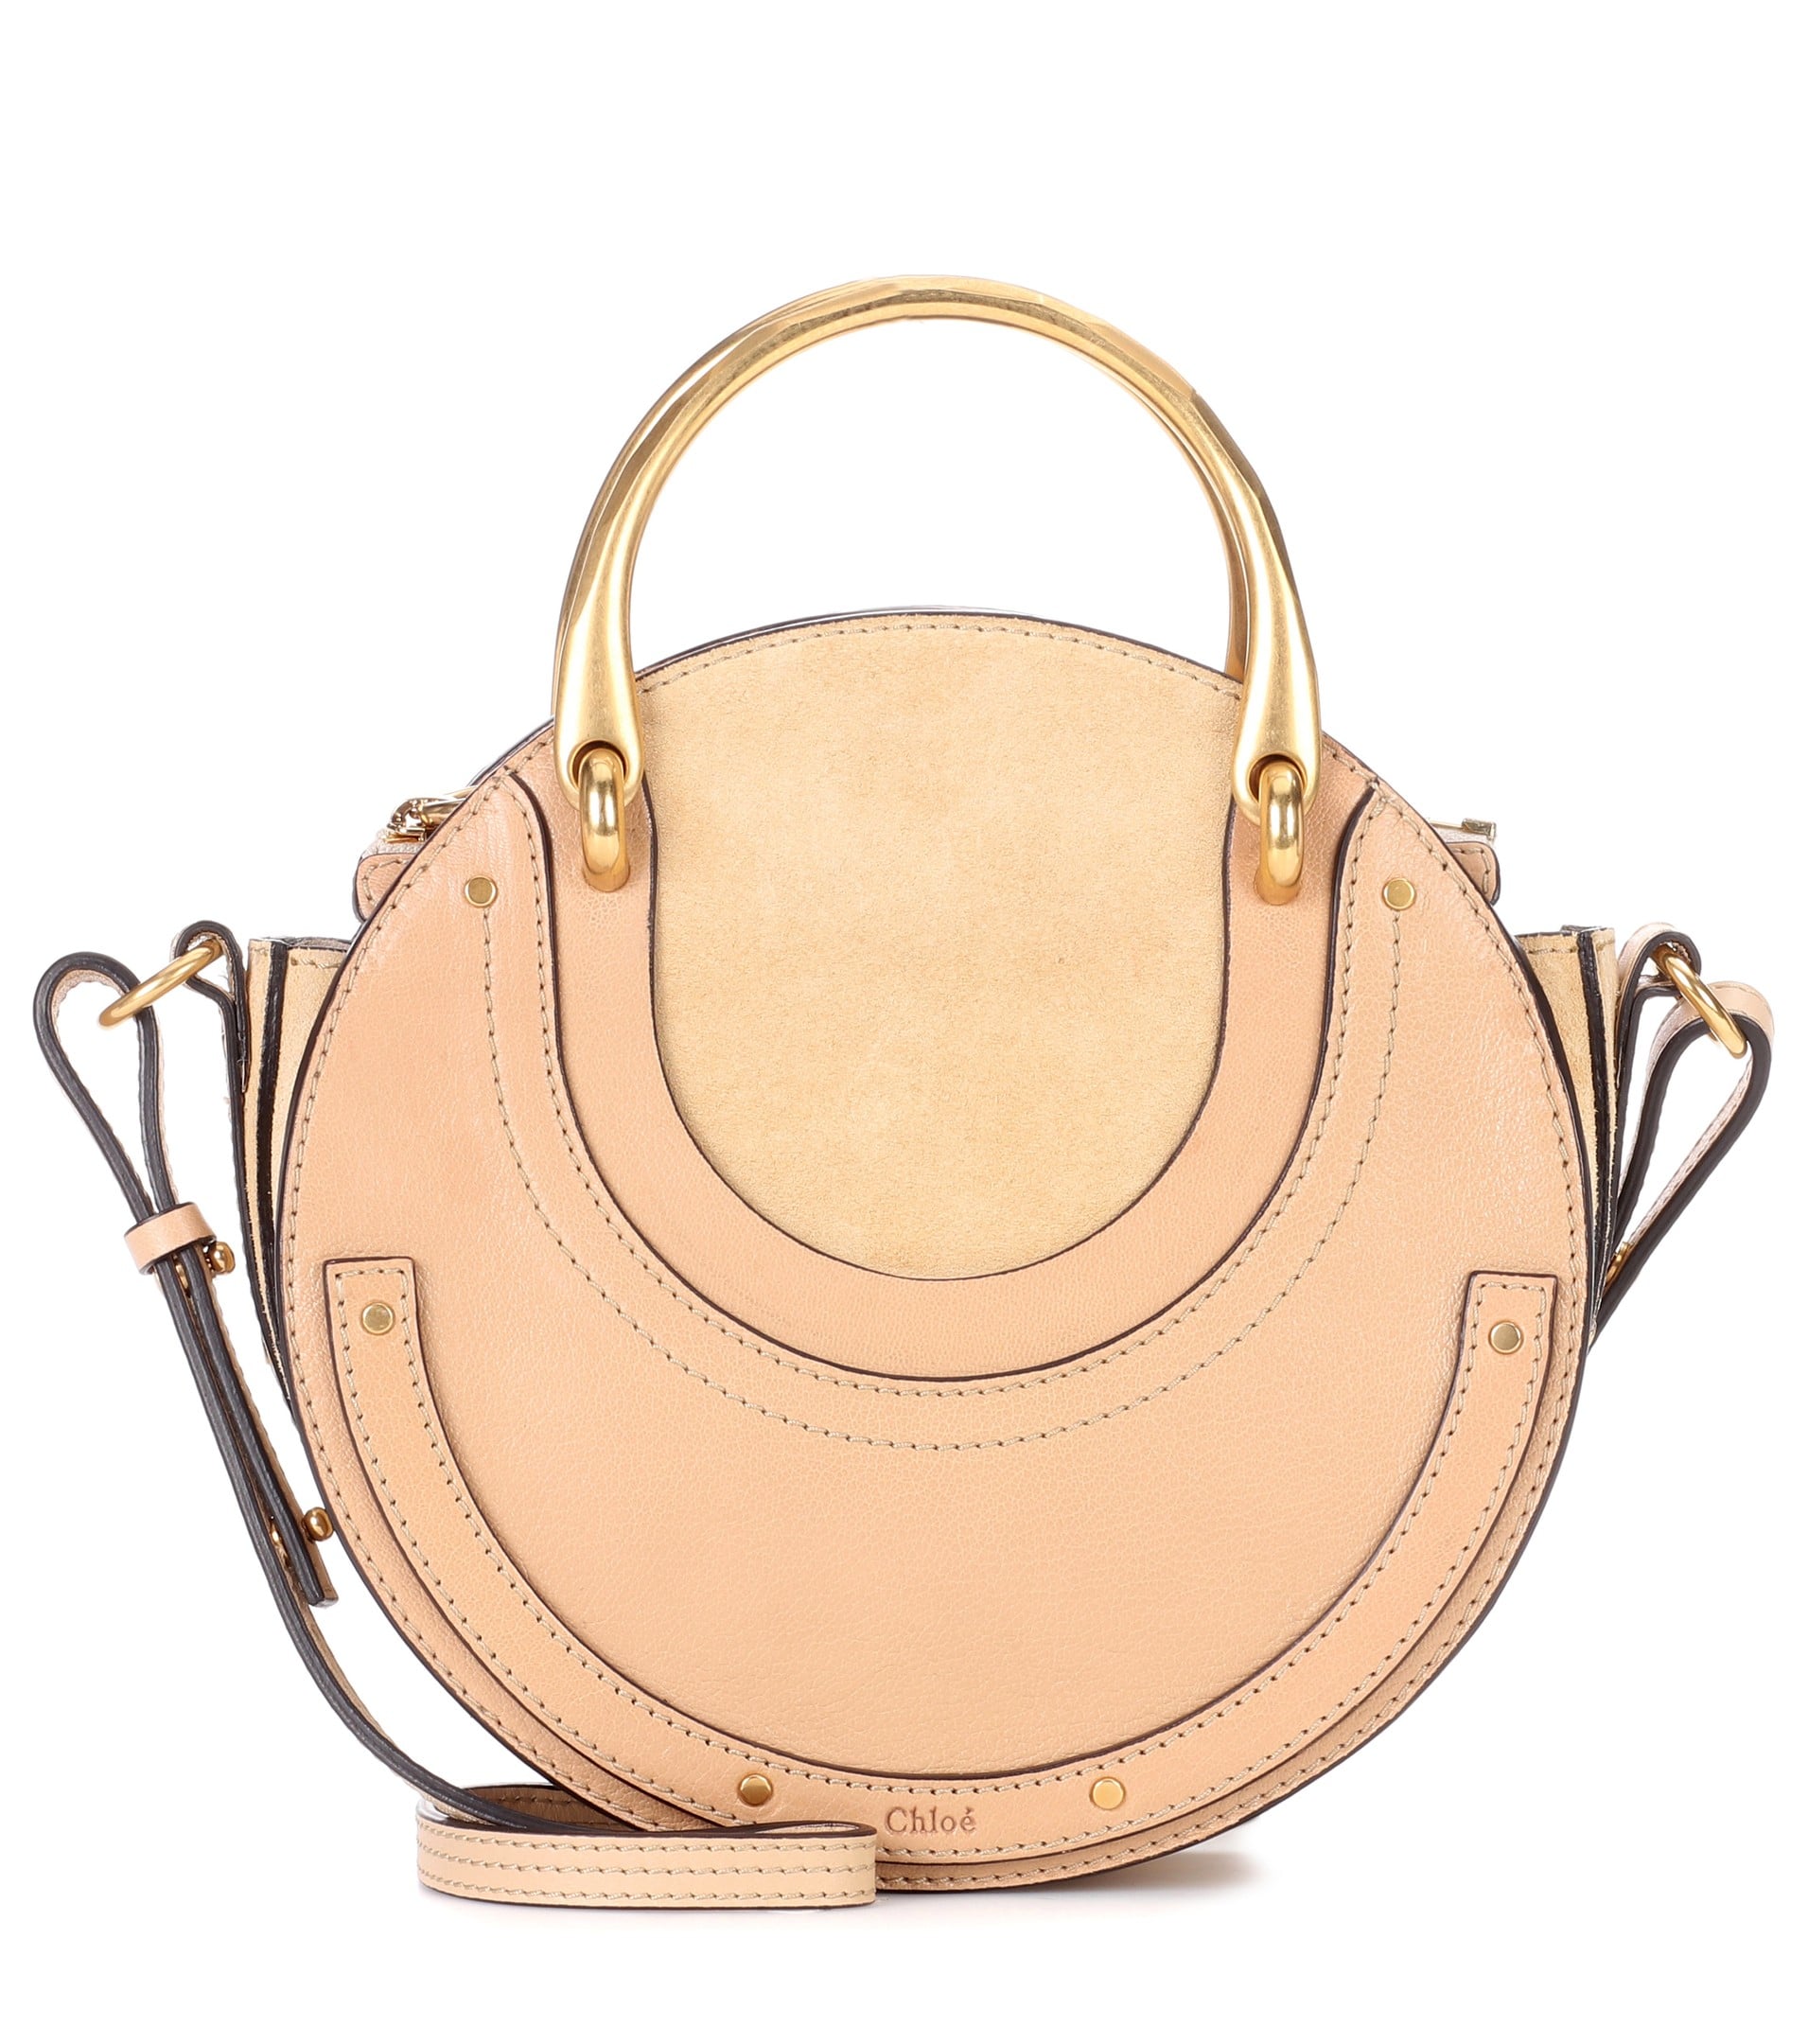 Chloe Pixie: the bag every fashion girl will want this fall